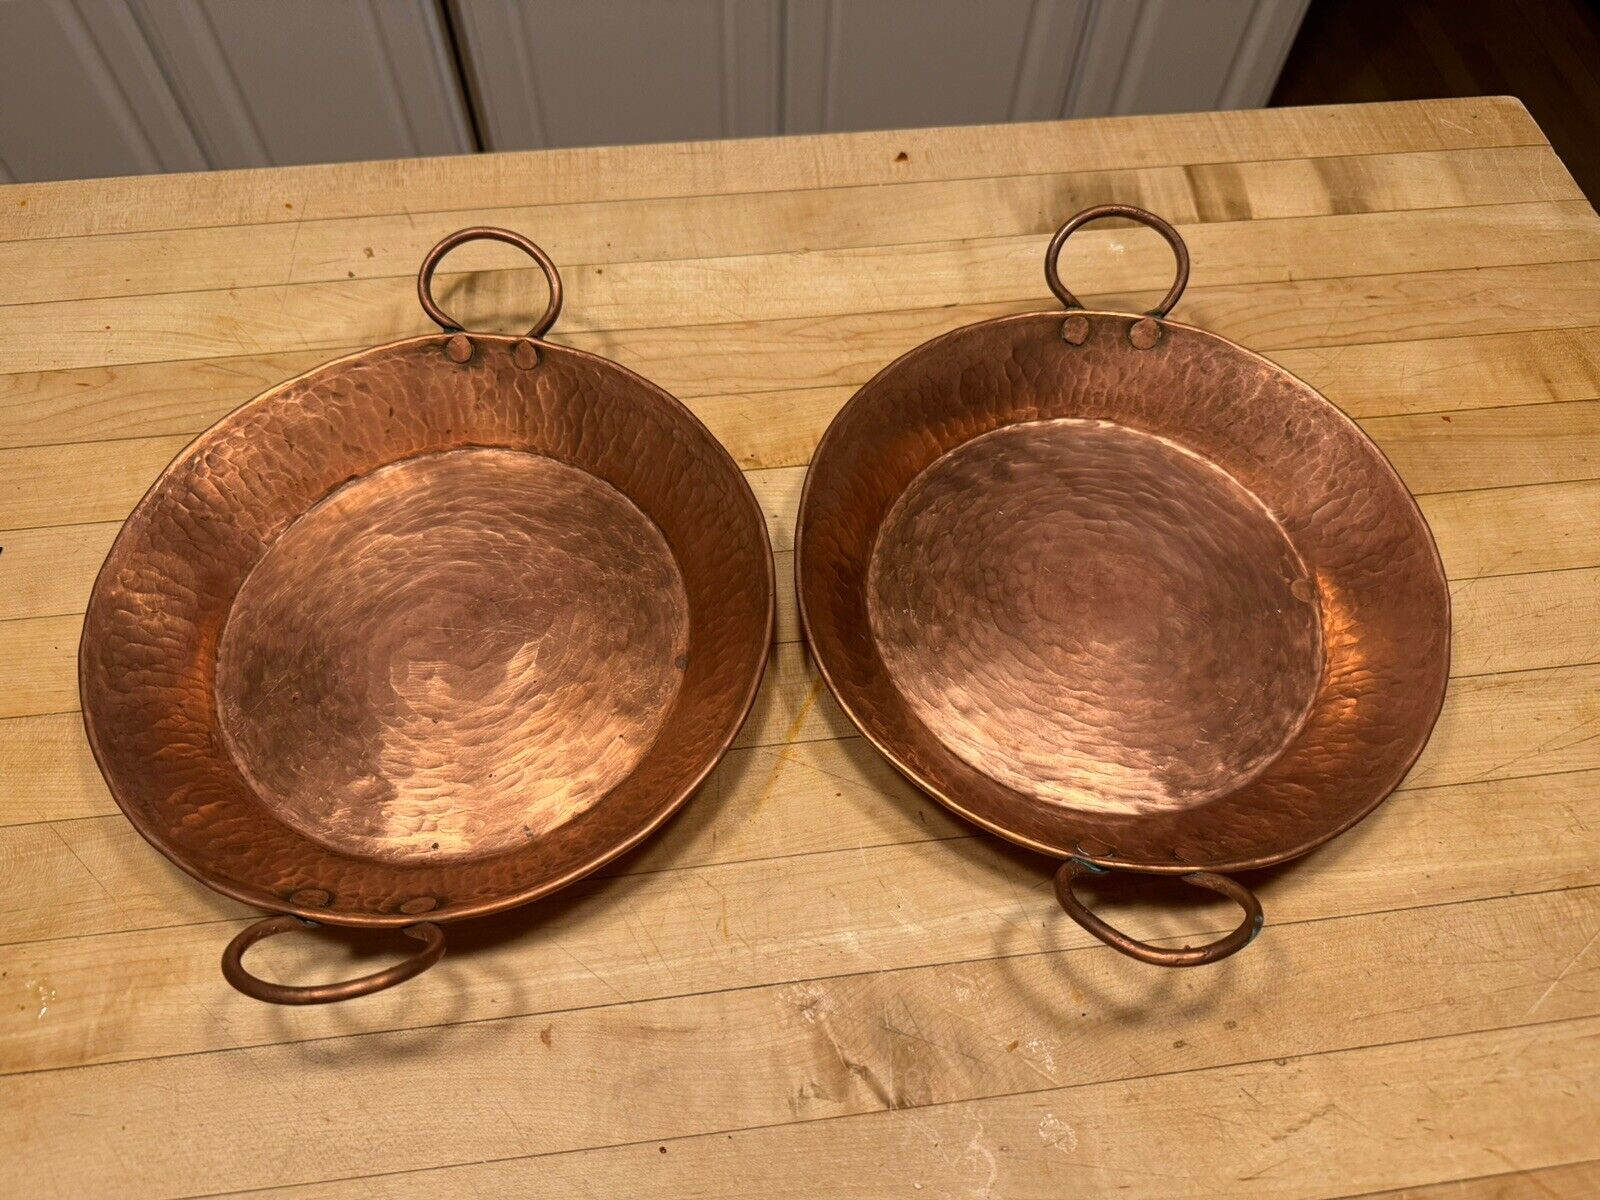 2 Vintage Antique Hand Hammered Copper Pan / Pot Handles 9 1/2” Heavy & Thick